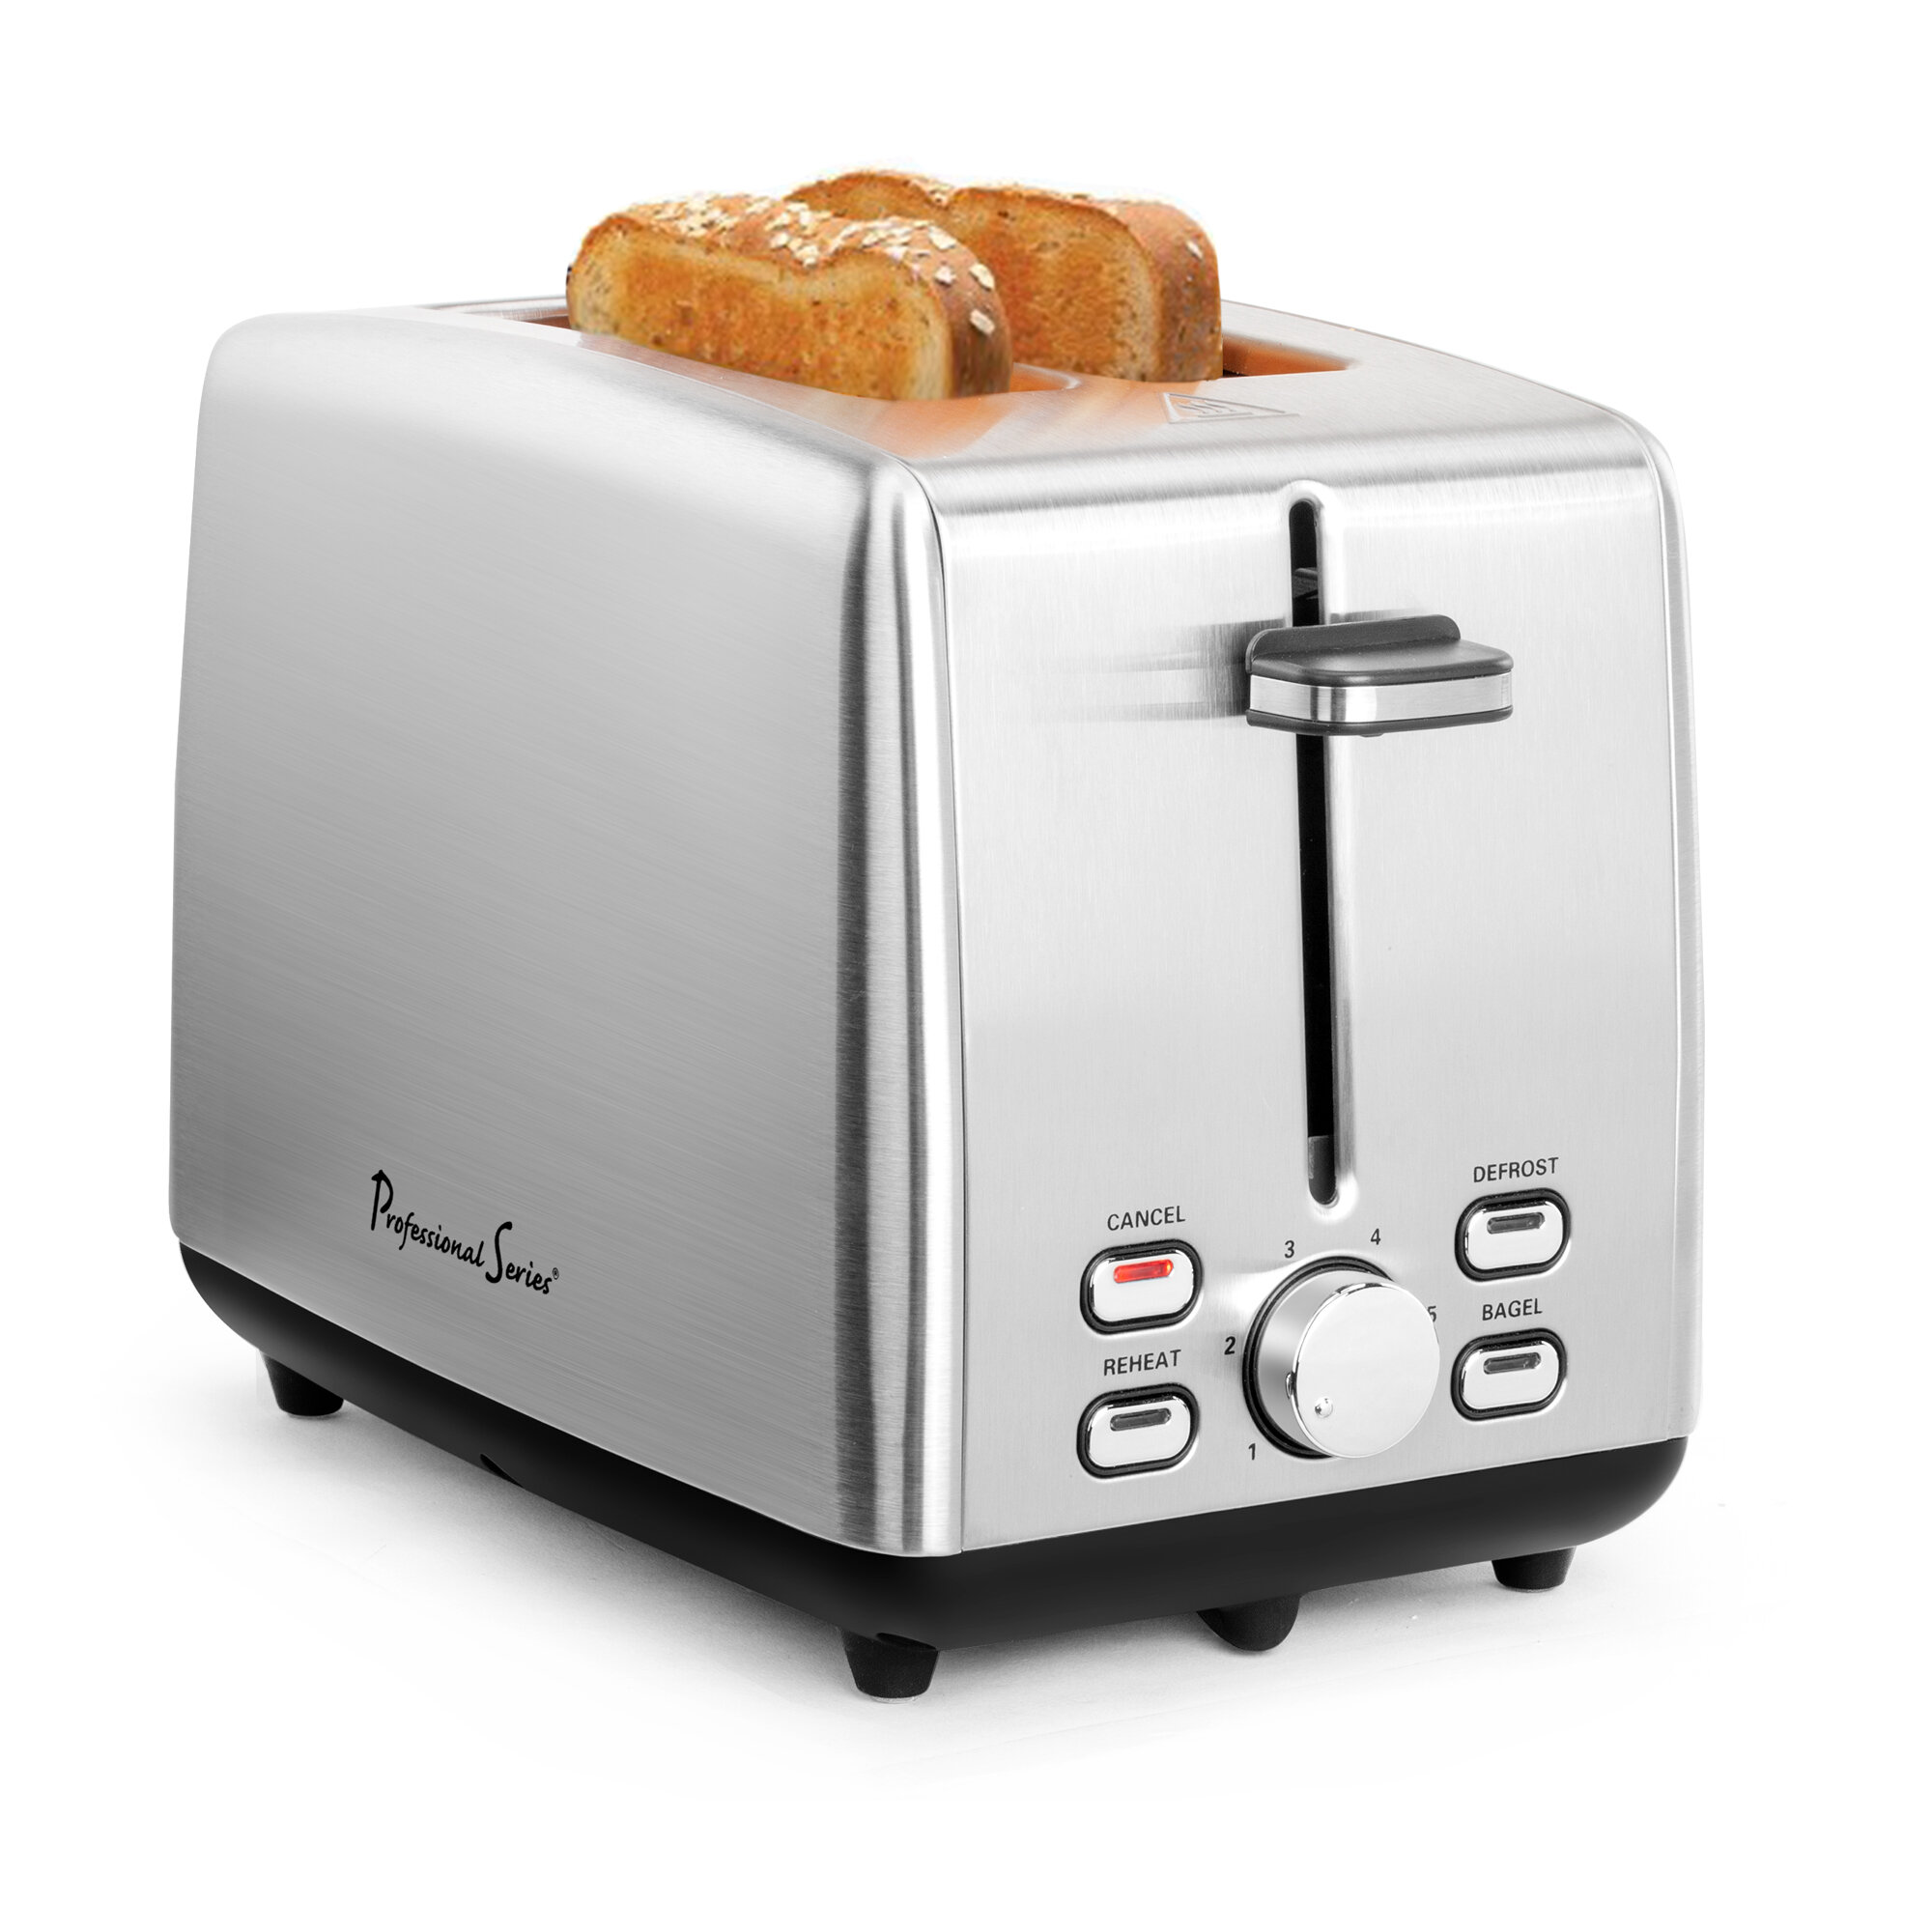 Long Slot Toaster 2 Slice Best Toaster 2 Slice Wide Slot, Vintage Black Toaster with Defrost/Reheat/Cancel/6 Bread Shade Settings/Removable Crumb